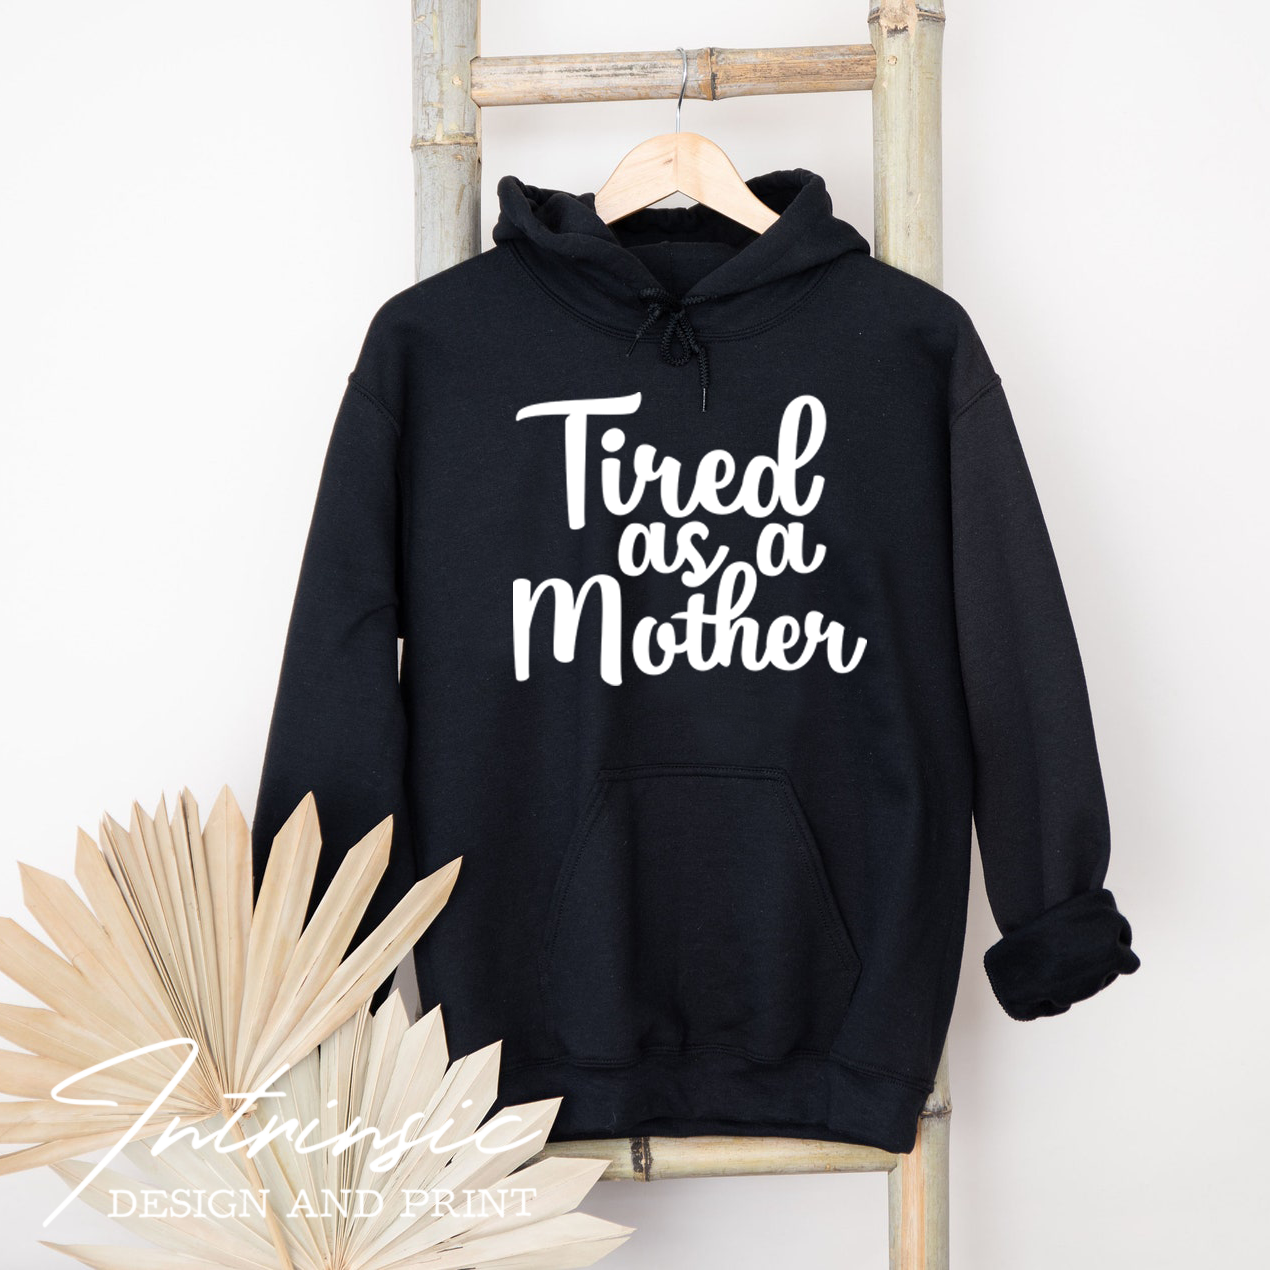 Tired as a Mother hoodie